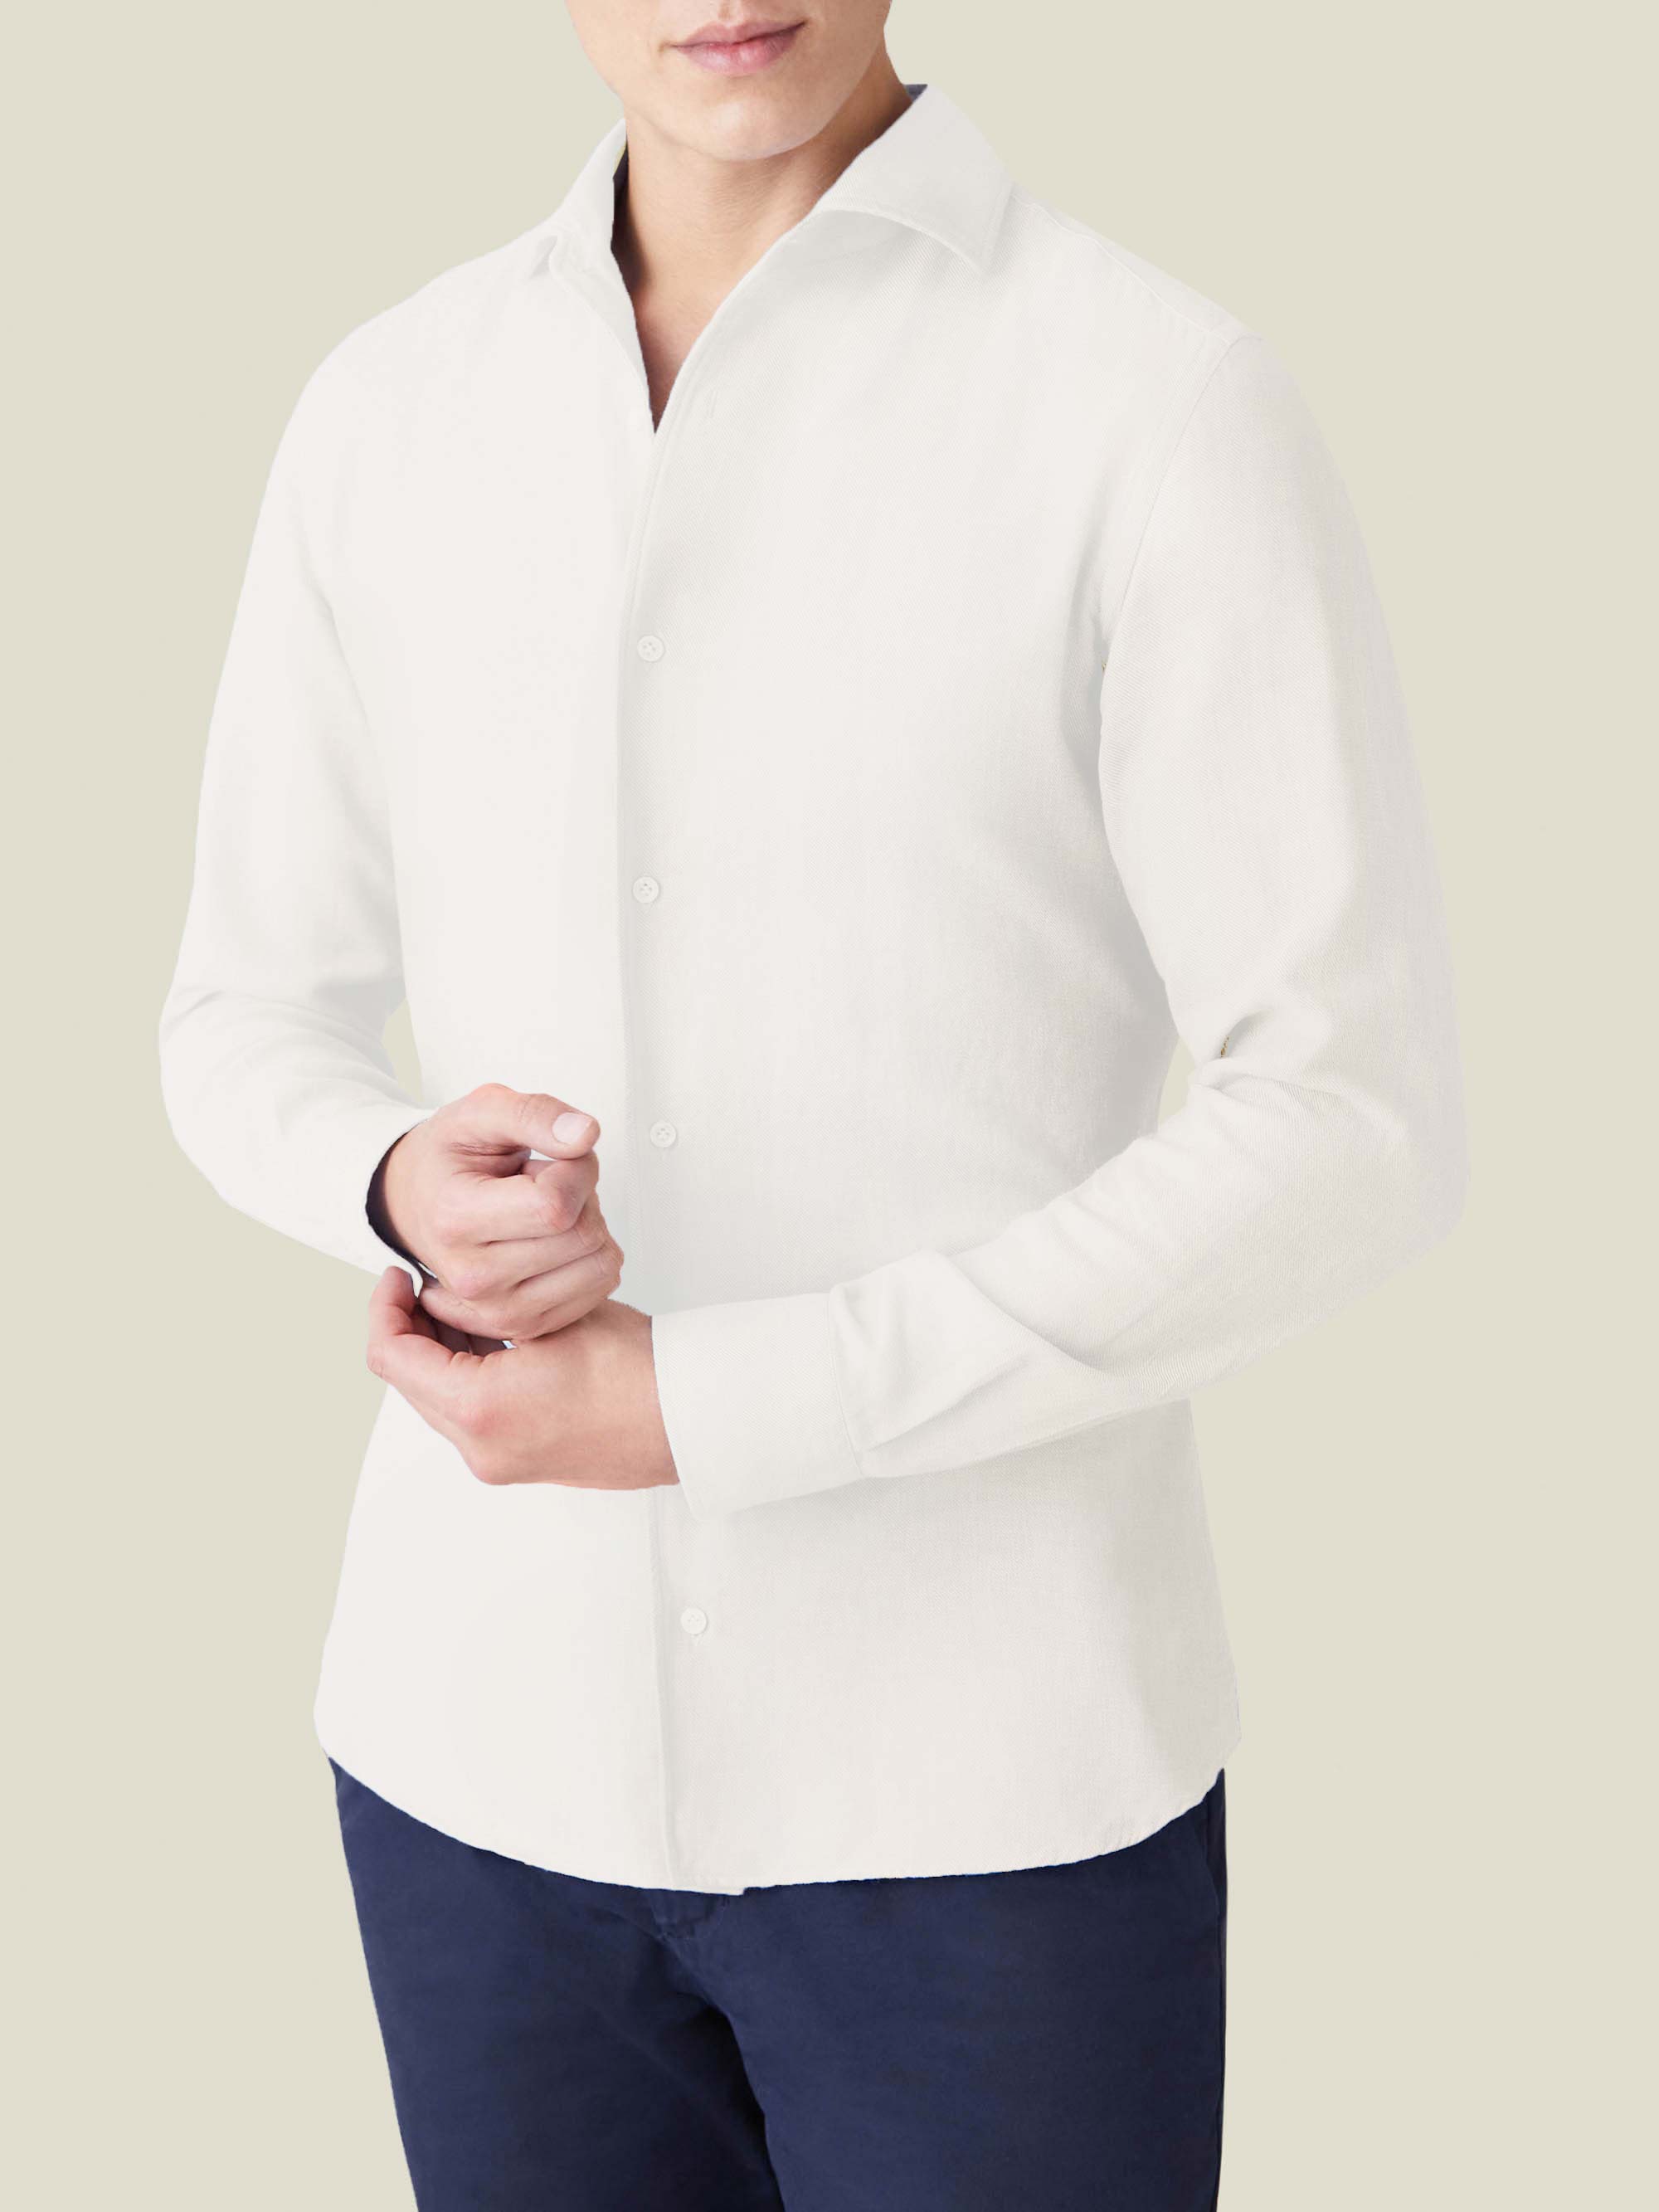 Luca Faloni - Men's White Cashmere-Cotton Shirt - Made in Italy product